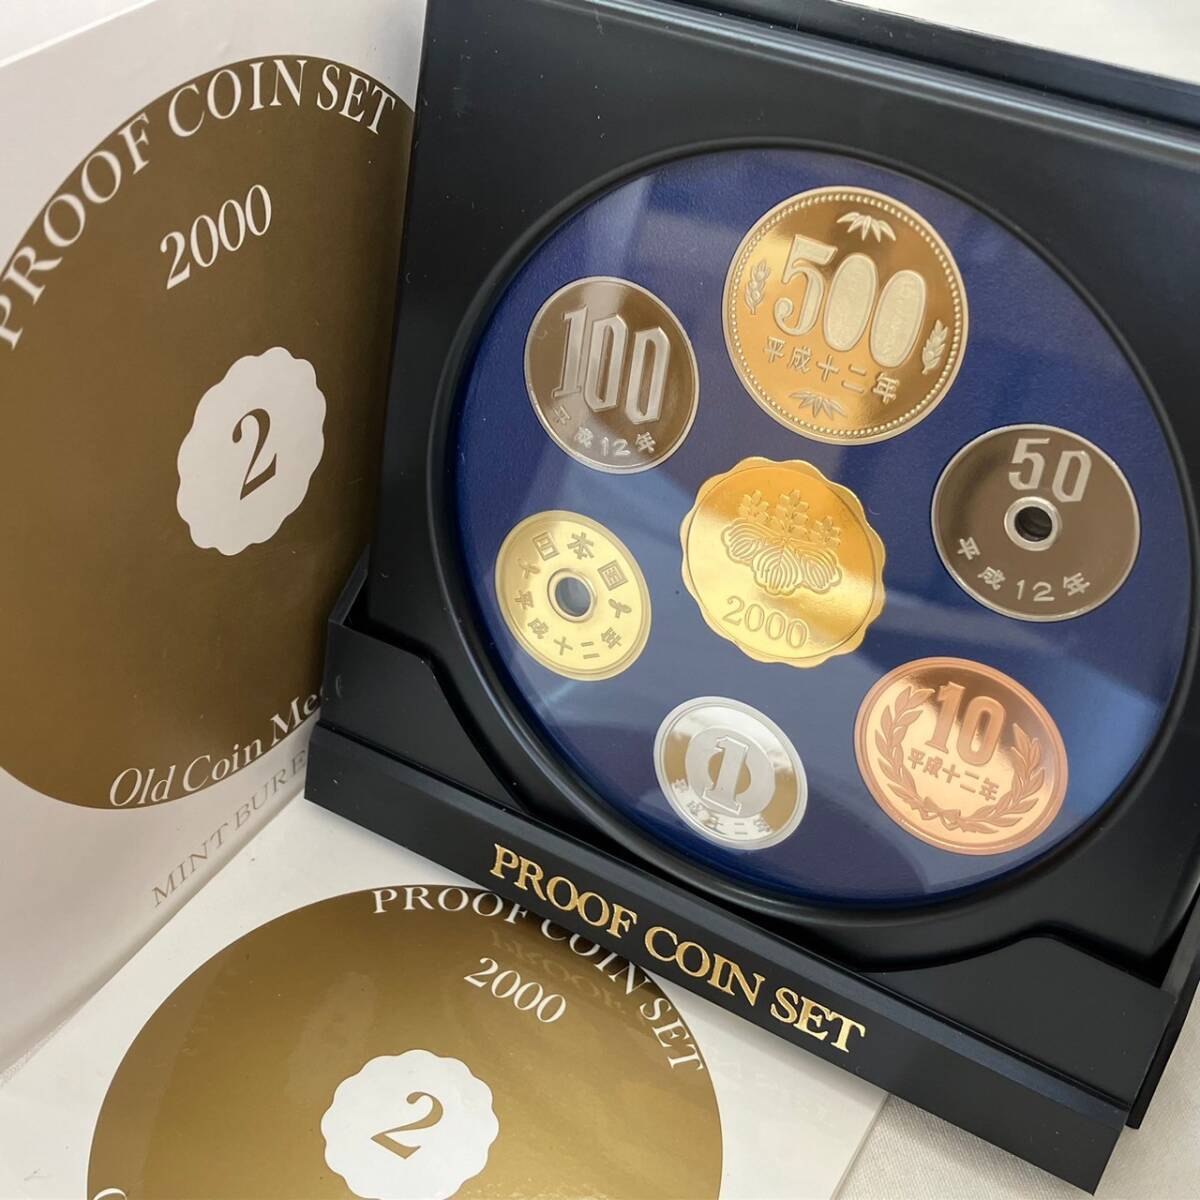 4856-2A PROOF COIN SET 2000 Old Coin Medal Series ミントコイン 額面総額666円 記念硬貨の画像1